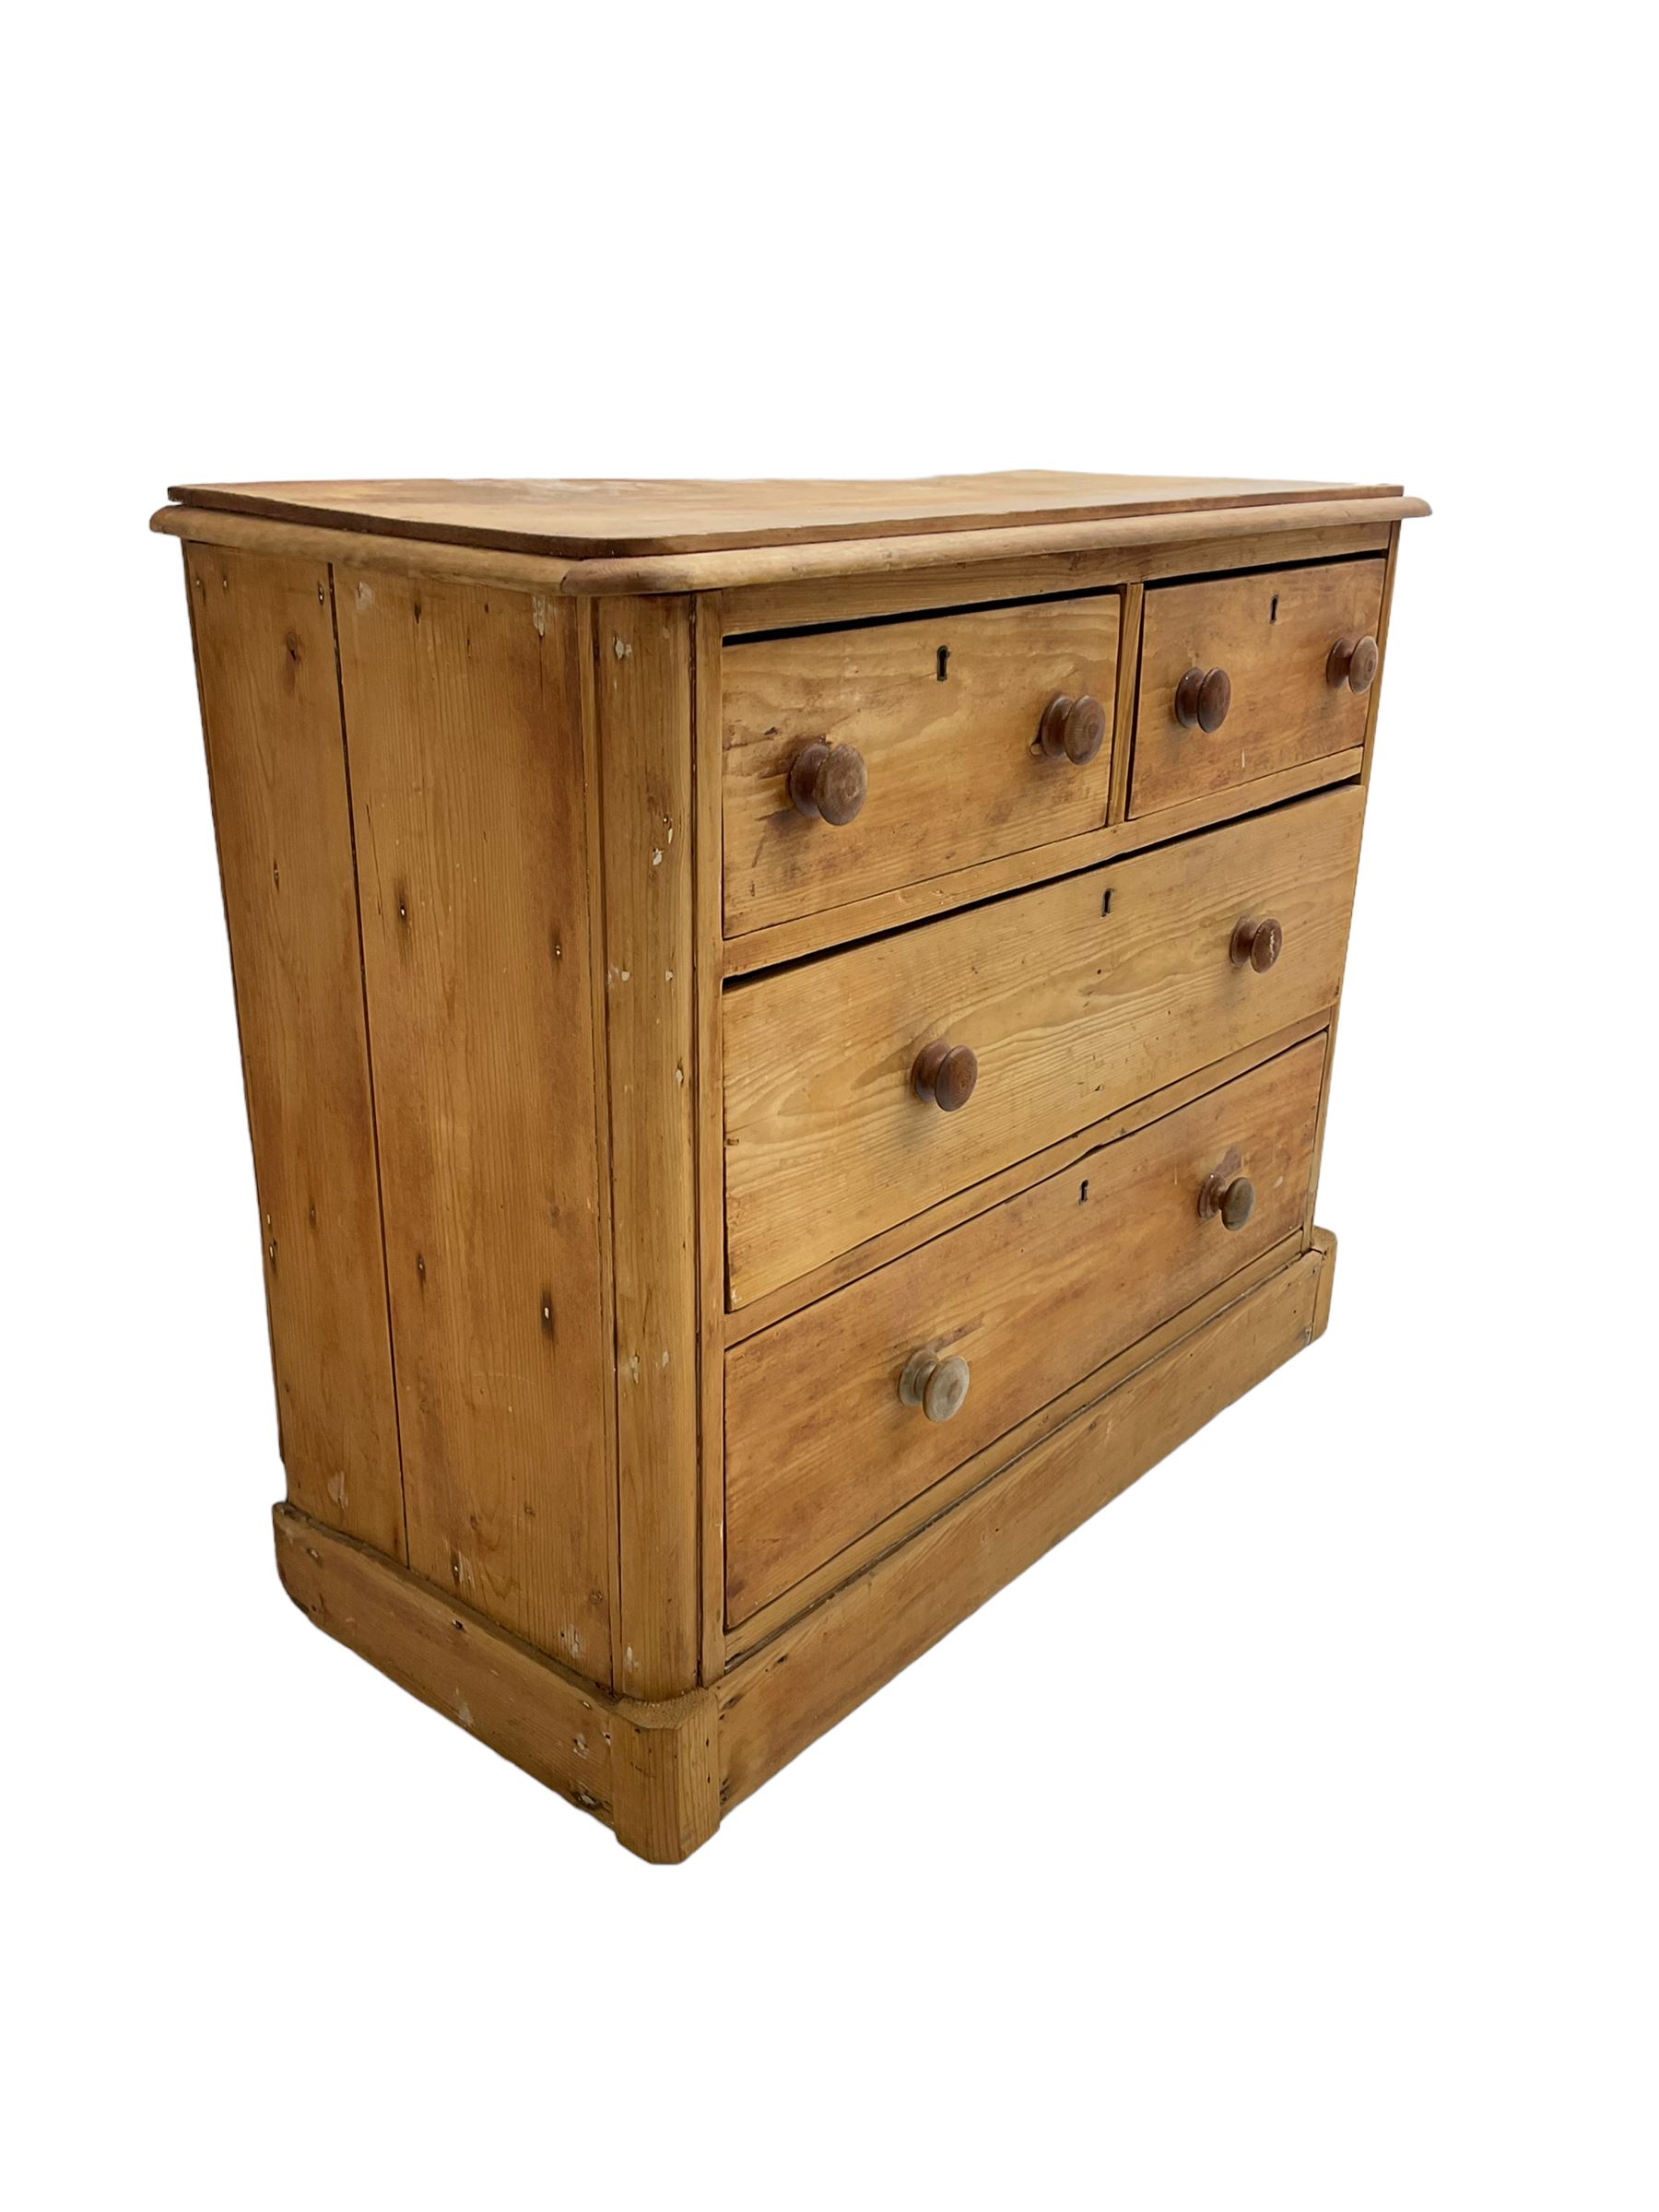 Late 19th century pine chest - Image 3 of 6